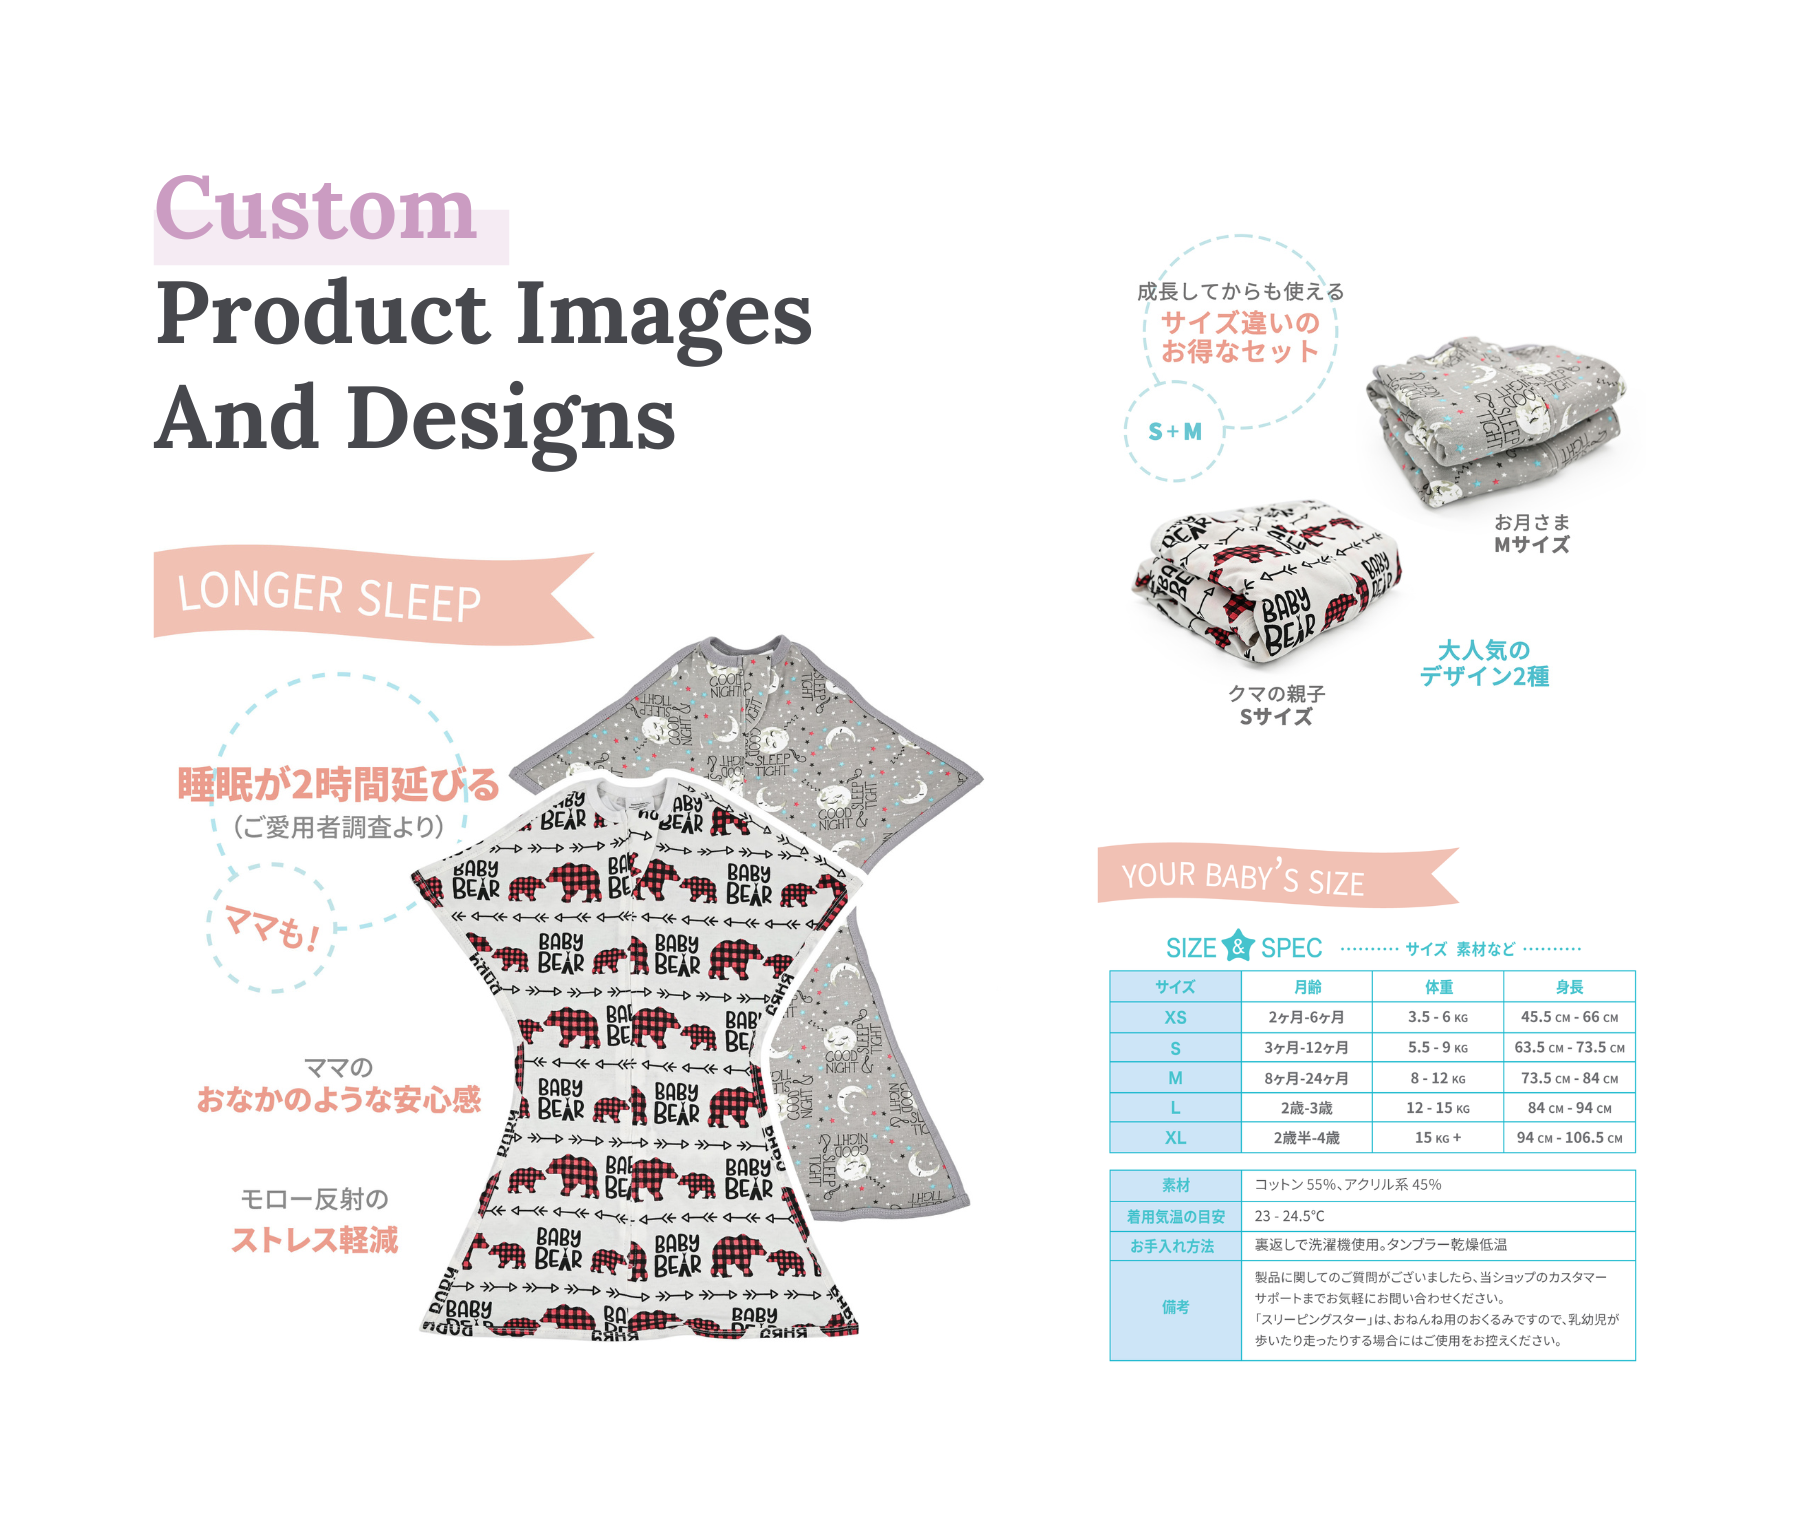 Humble Bunny case study for Sleeping Baby Japan e-commerce custom product design